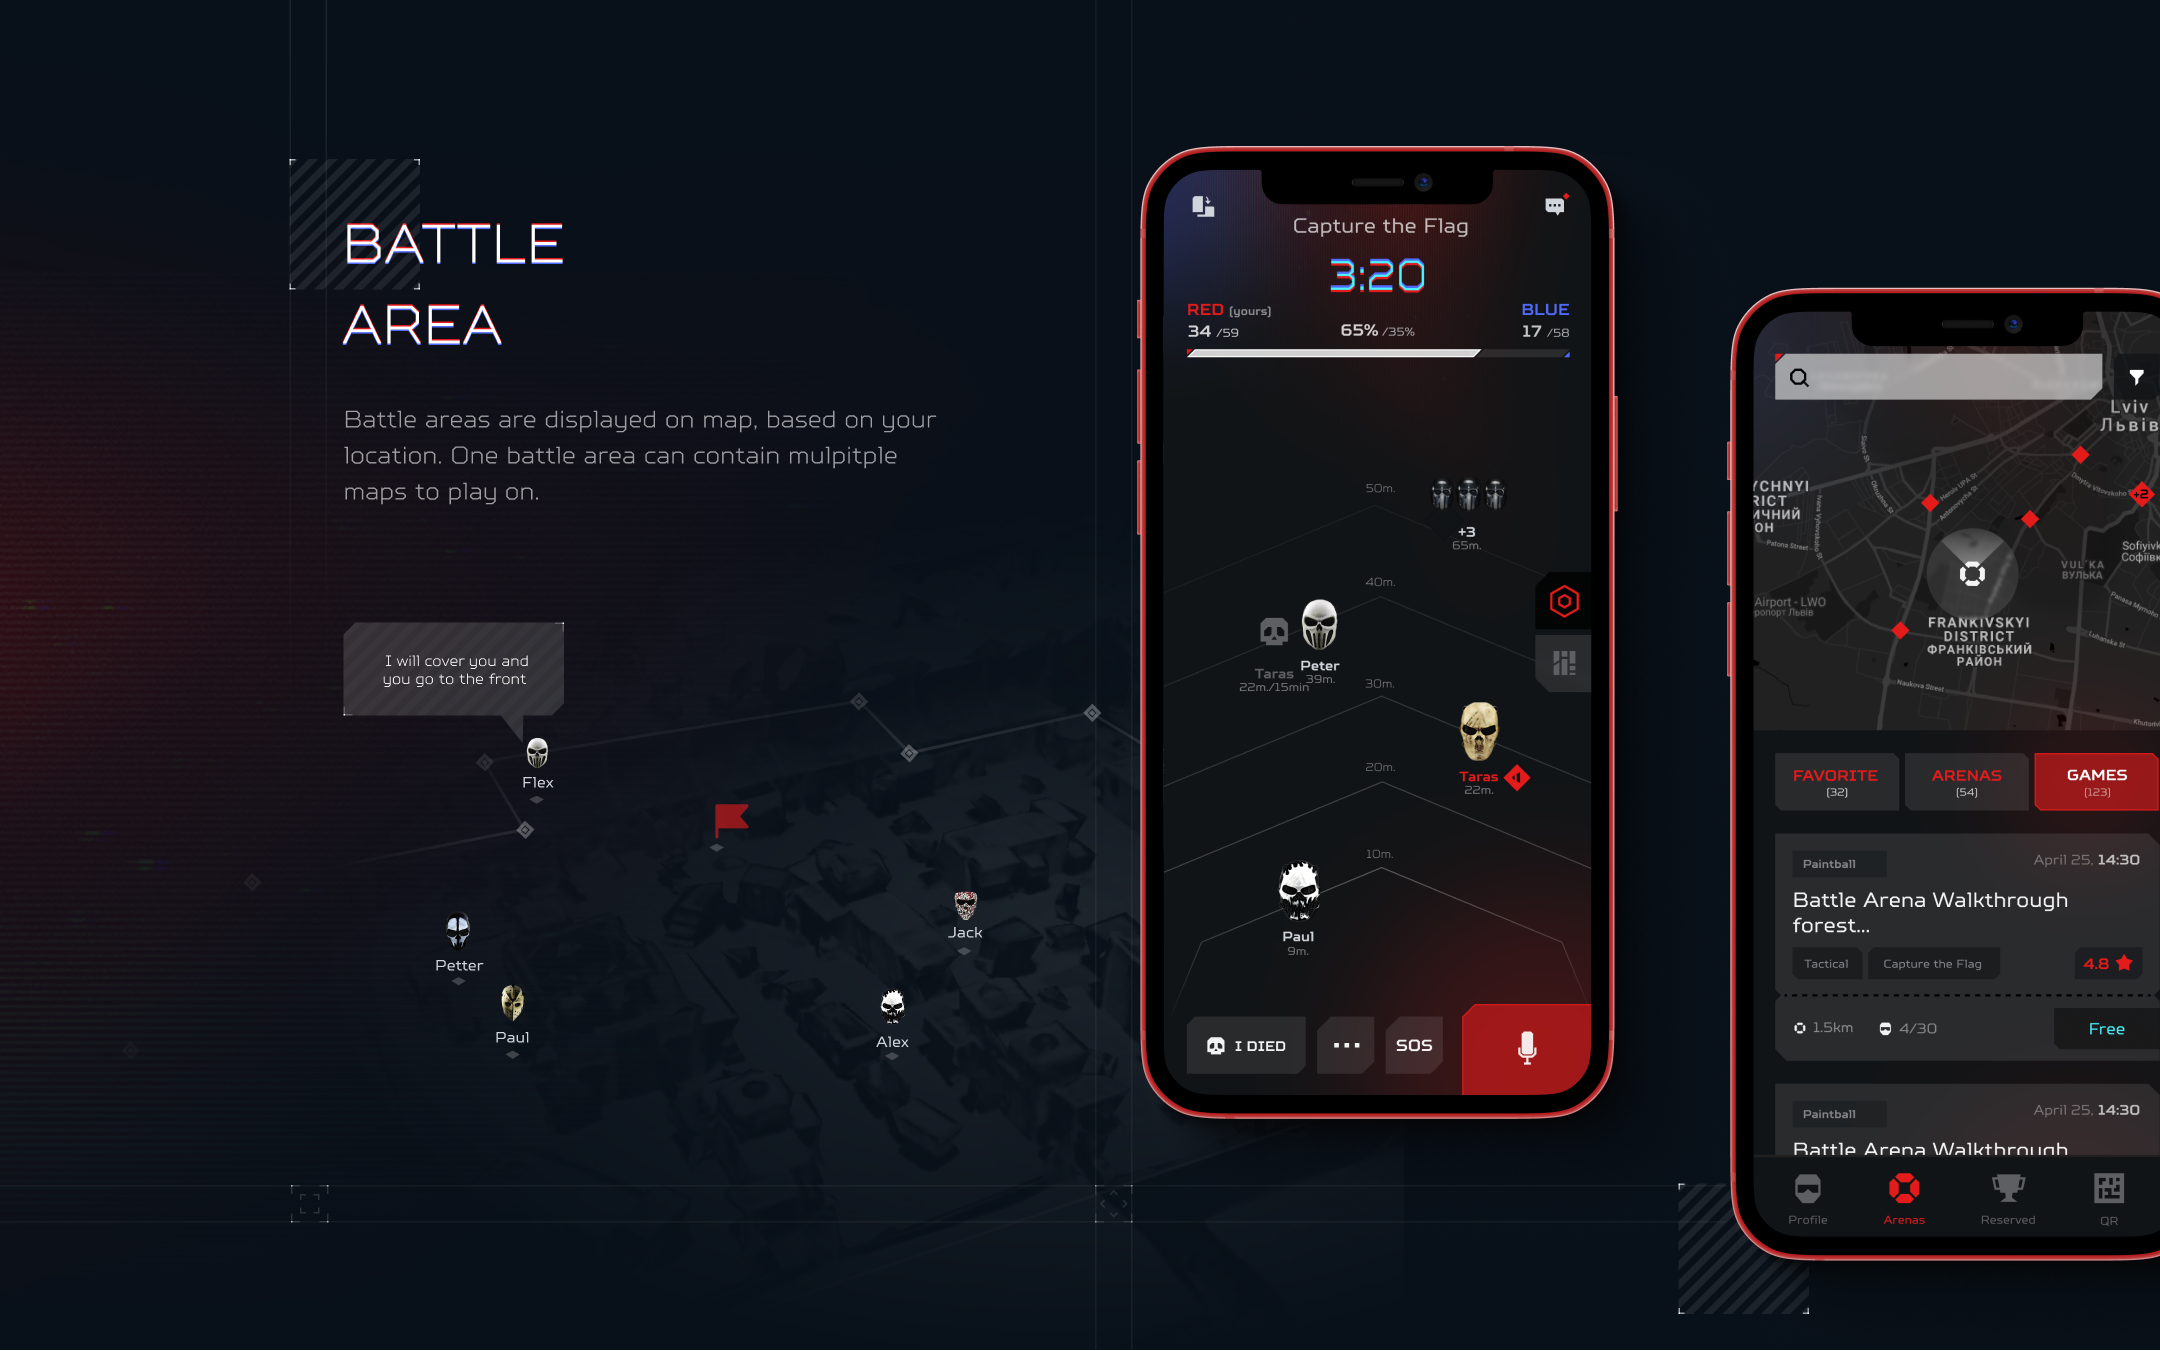 Battle area screens for an immersive shooter